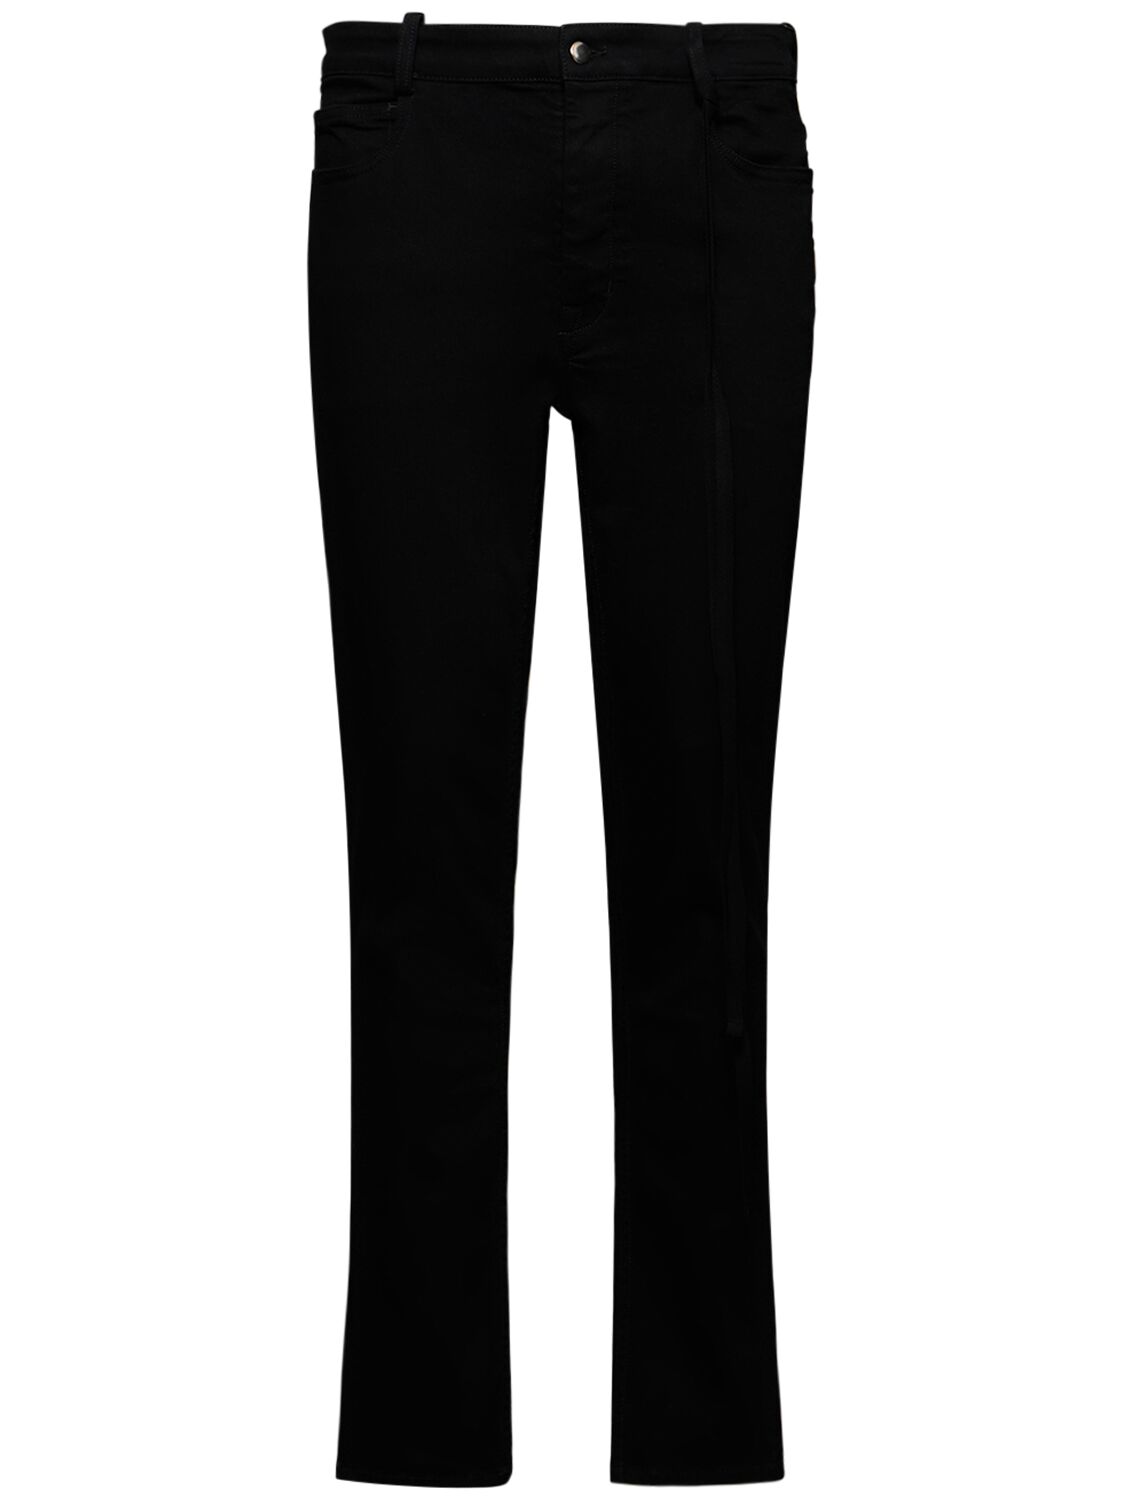 Ann Demeulemeester Wout Cotton Blend Skinny Trousers In Black